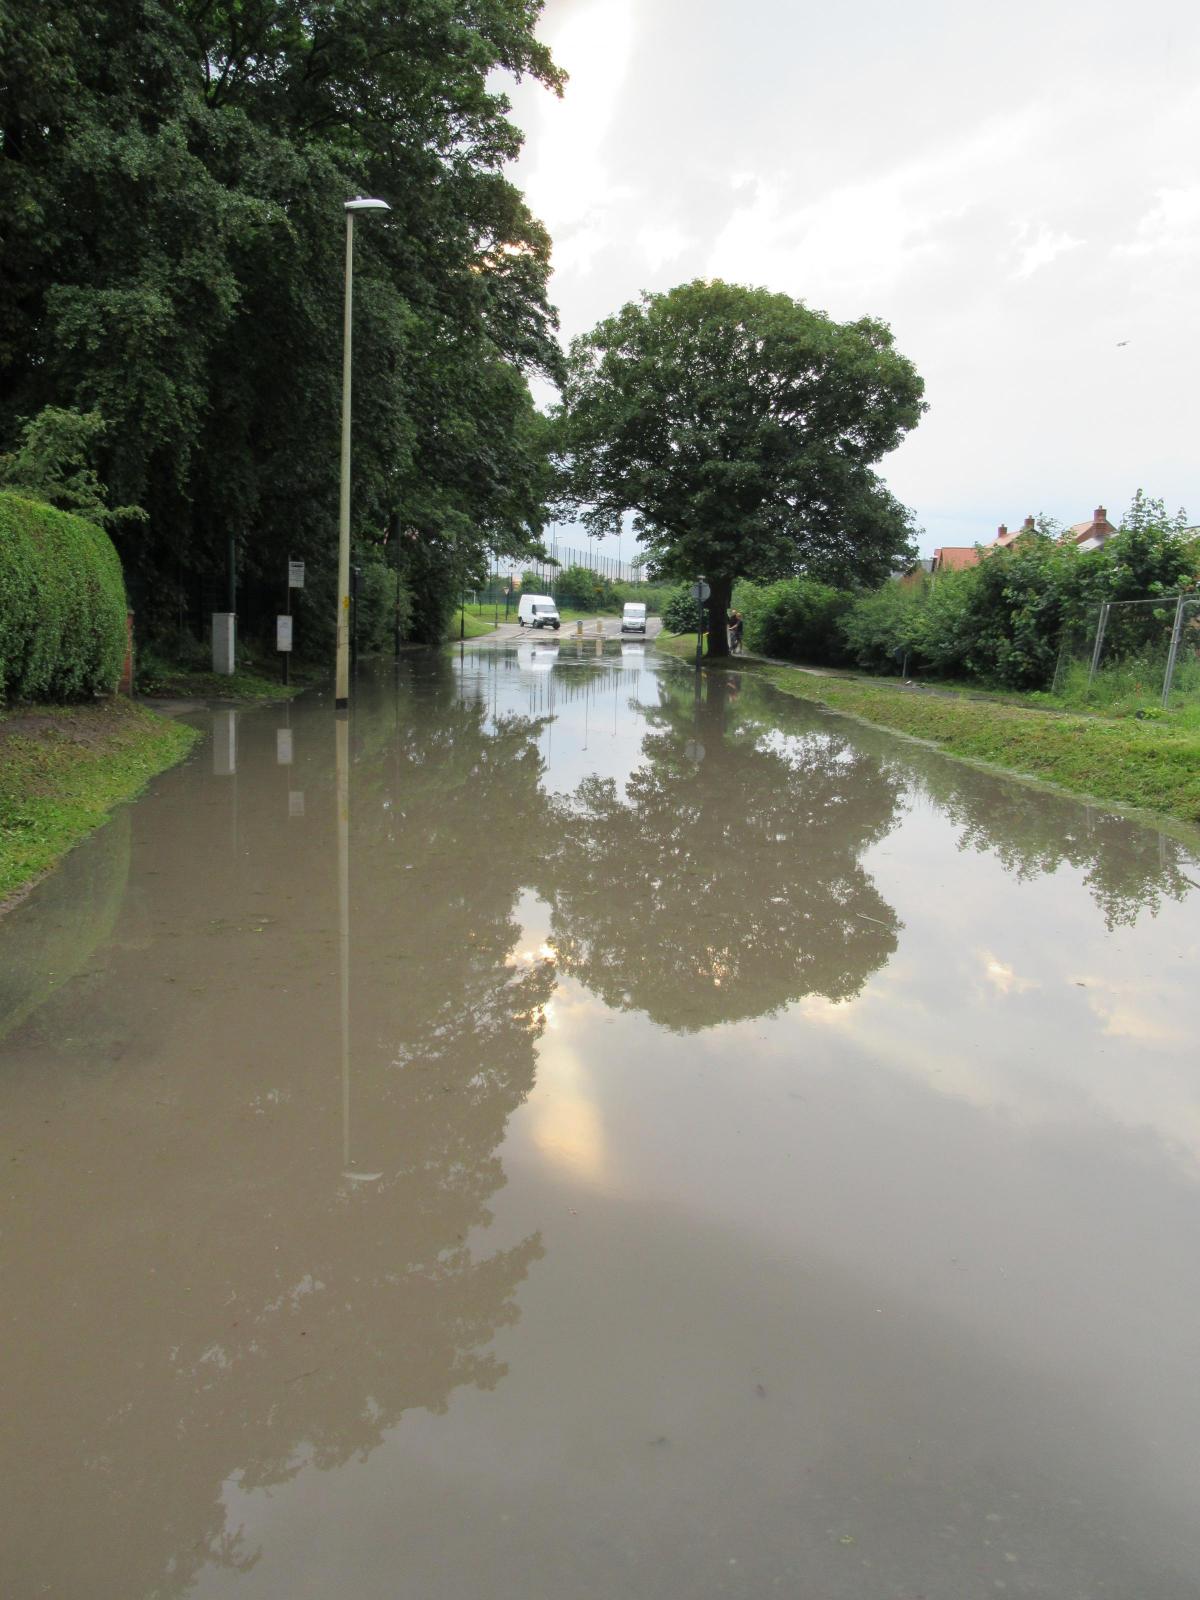 Flooding on Broughton Rd in Malton, 8pm on July 6. Picture: Simon Thackray